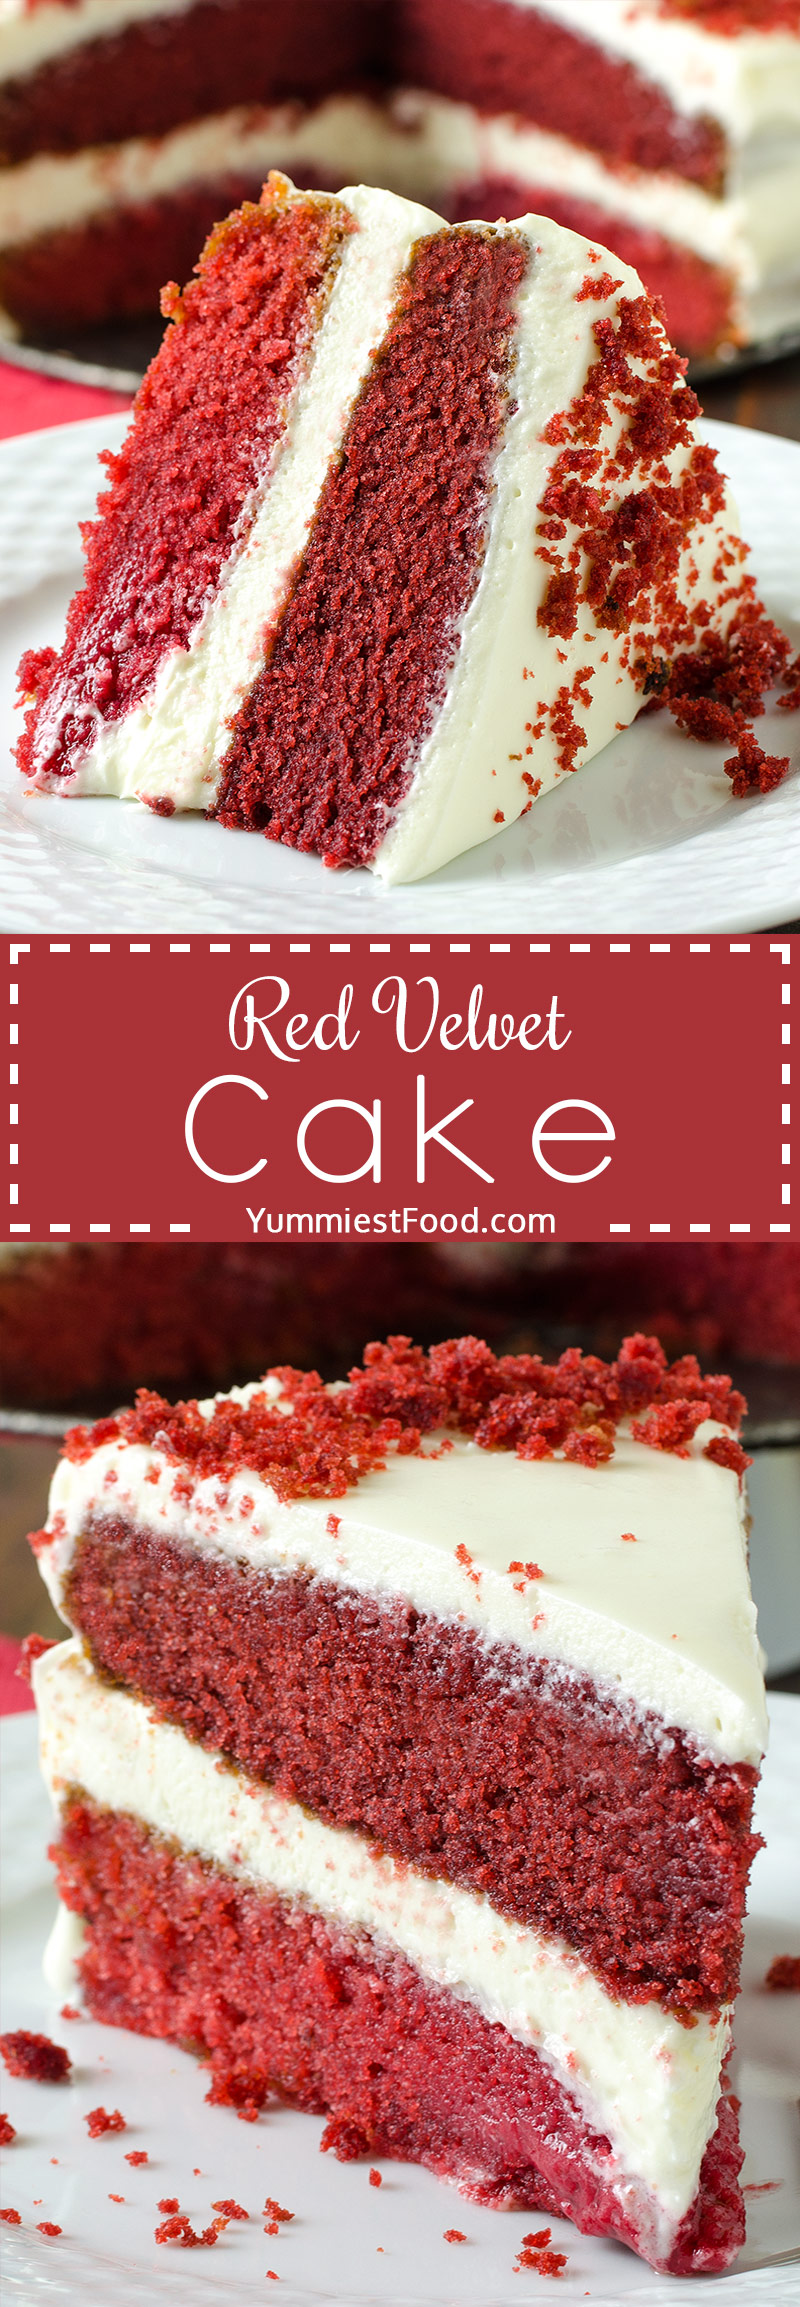 RED VELVET CAKE – Super moist, flavorful and perfect cake with cream cheese frosting! This gorgeous red beauty is the perfect choice of cake for any occasion!